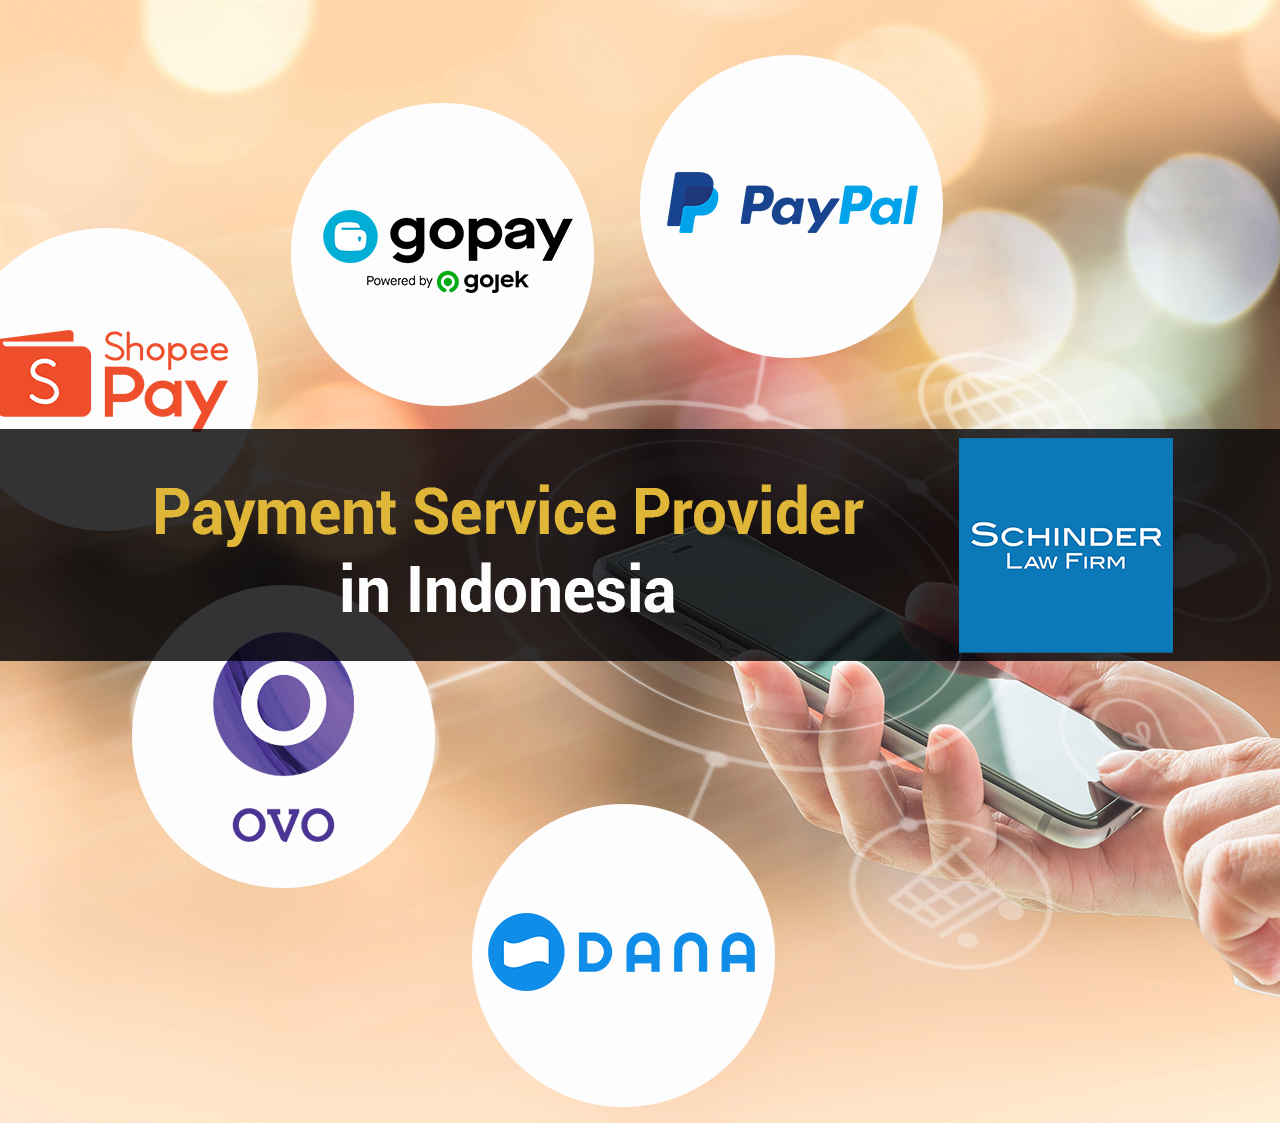 Payment Service Provider in Indonesia Schinder Law Firm